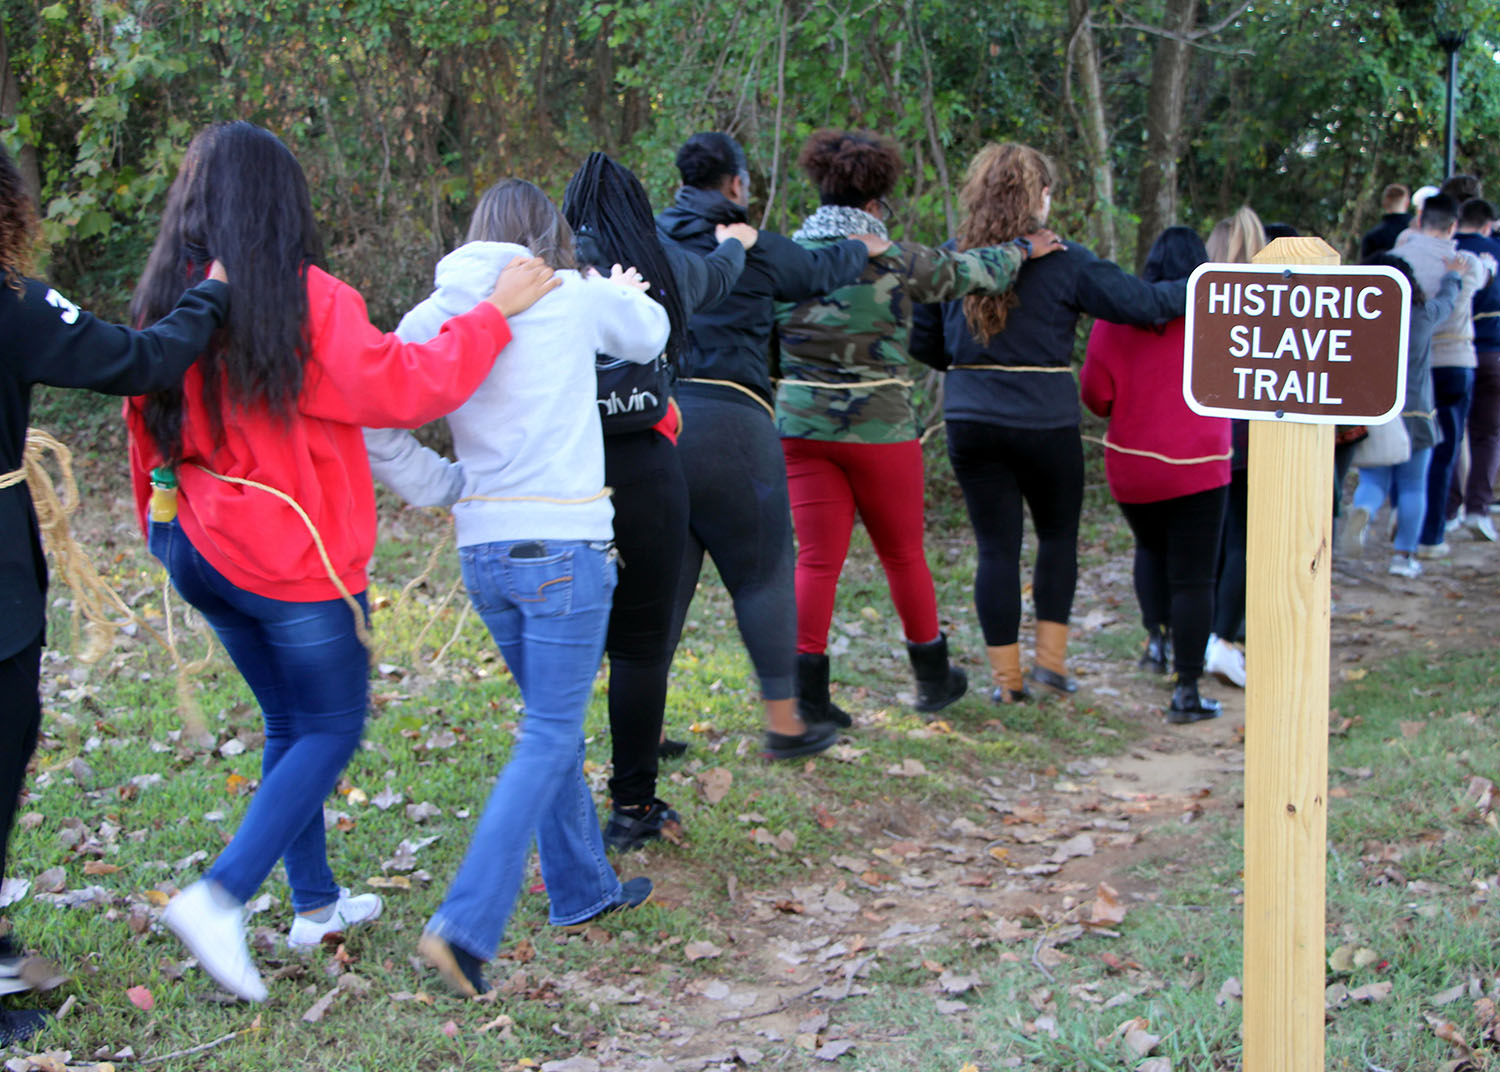 Marching in the footsteps of history up the slave trail, students are able to trace a connection to Richmond’s past.